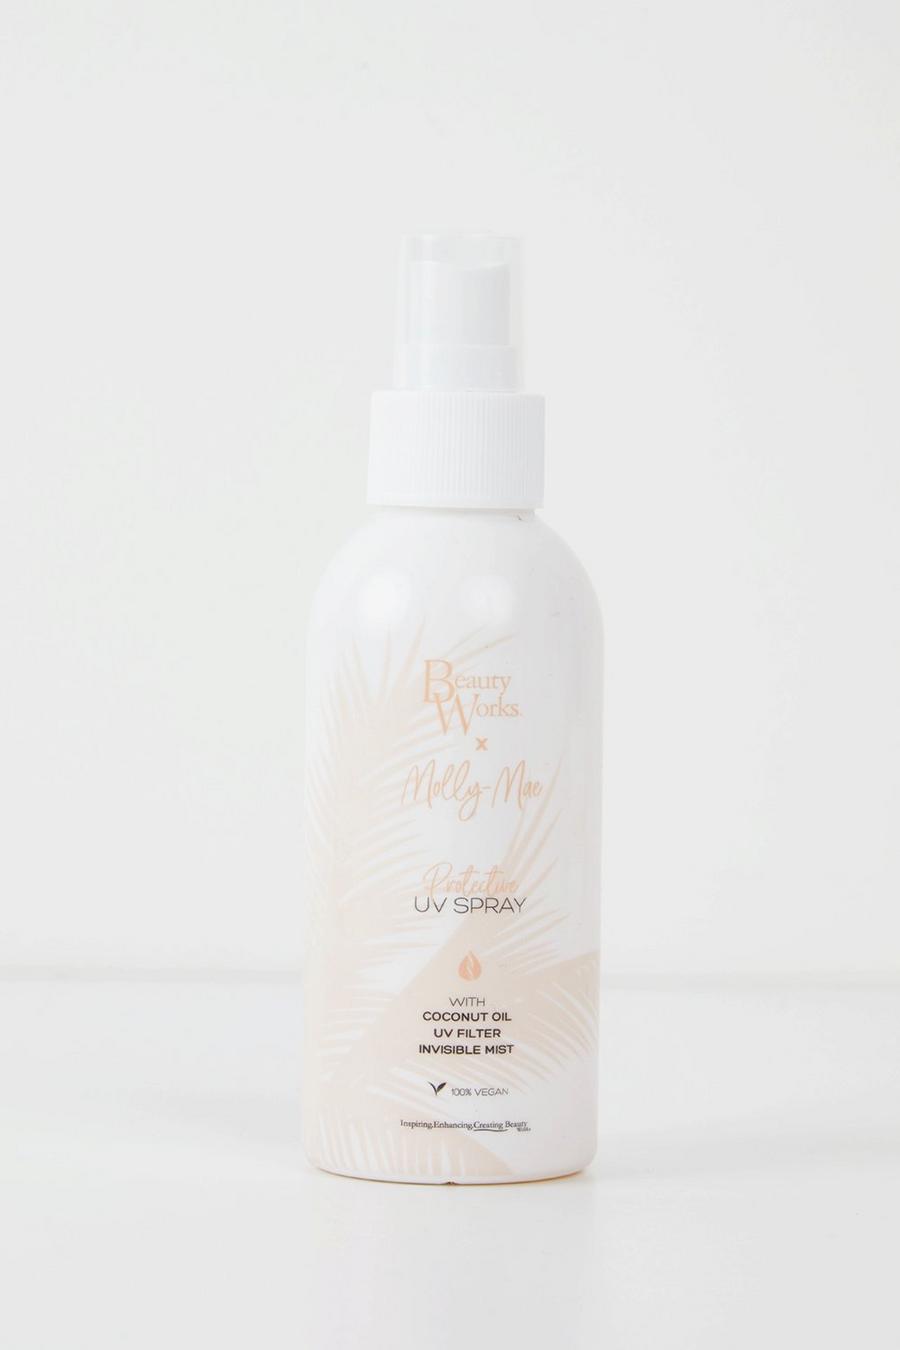 Beauty Works X Molly Mae UV-Spray, White image number 1